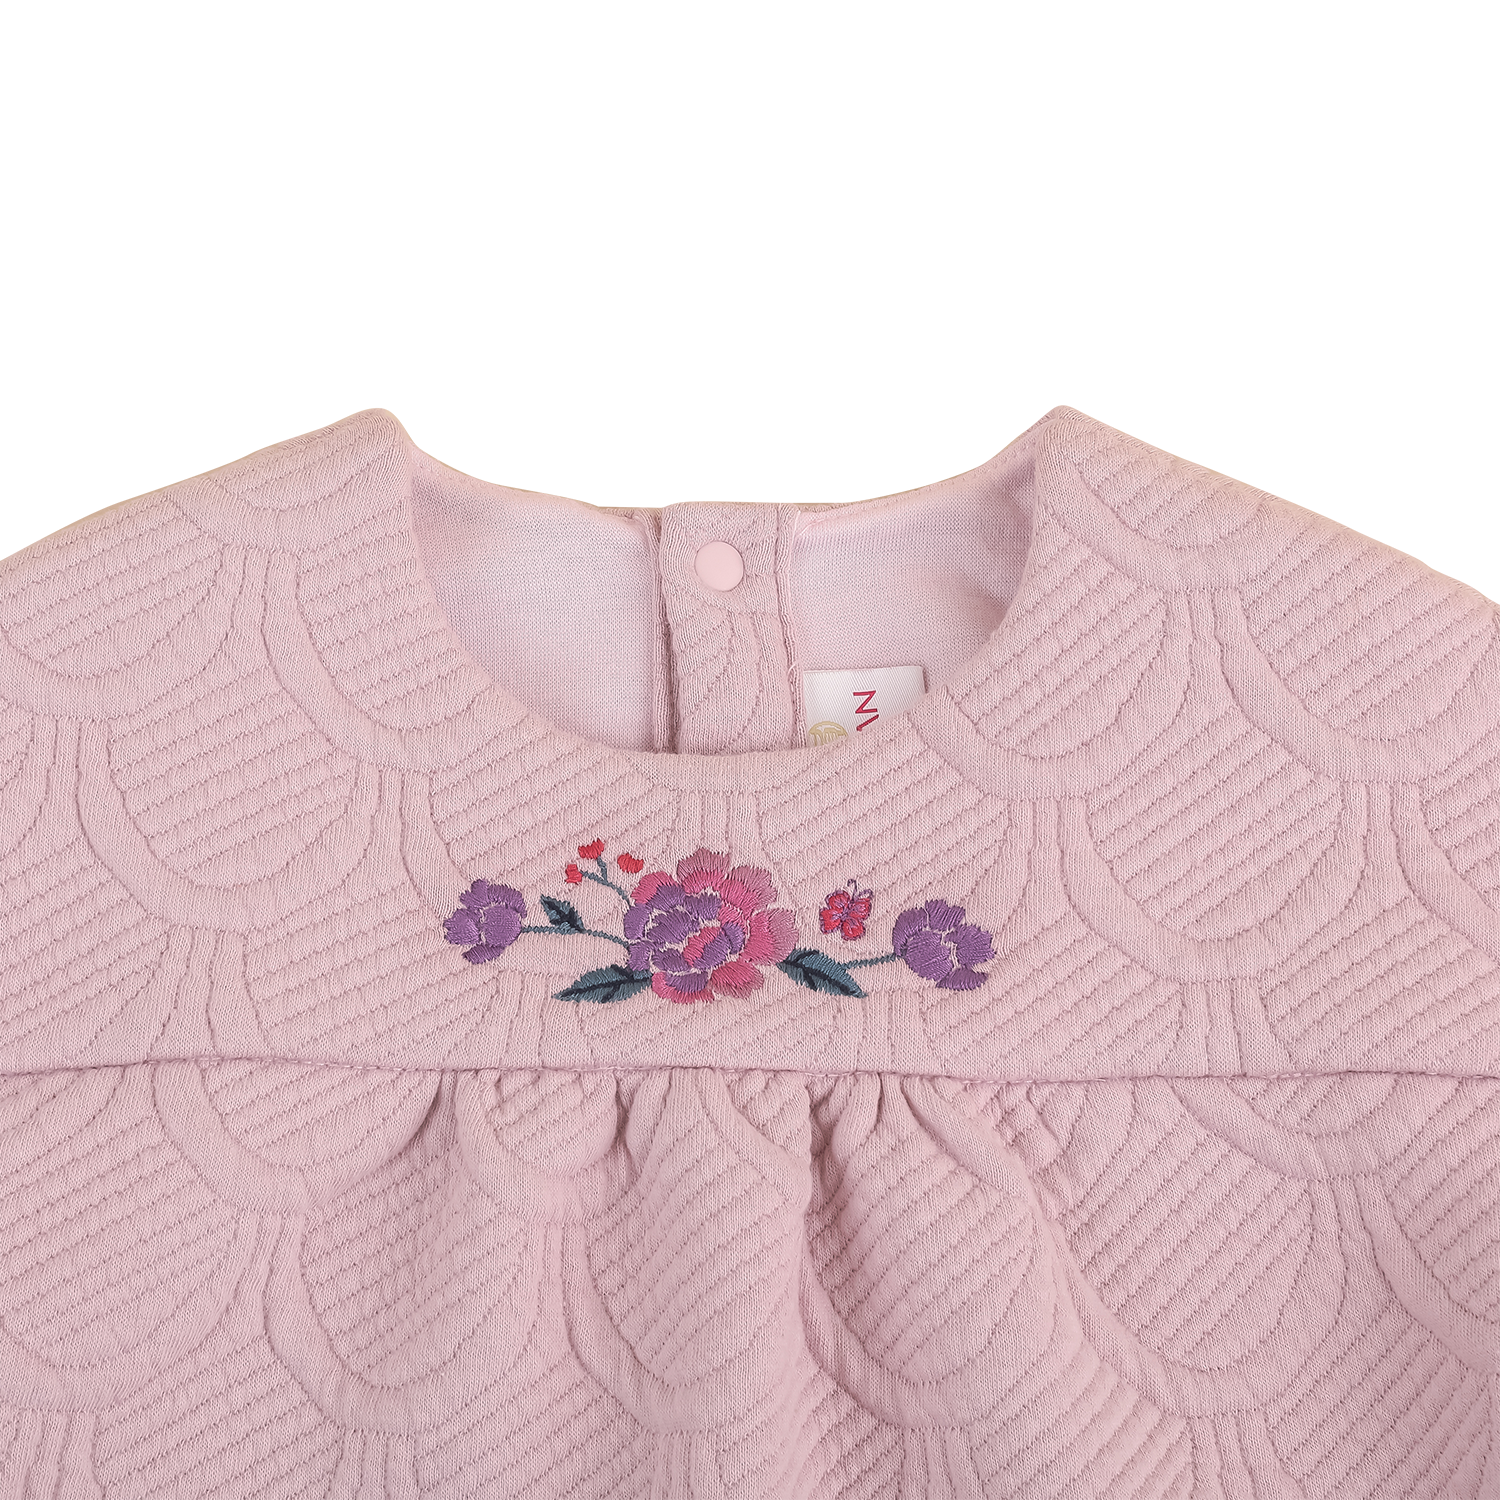 Dusty lavender baby top with peony detail